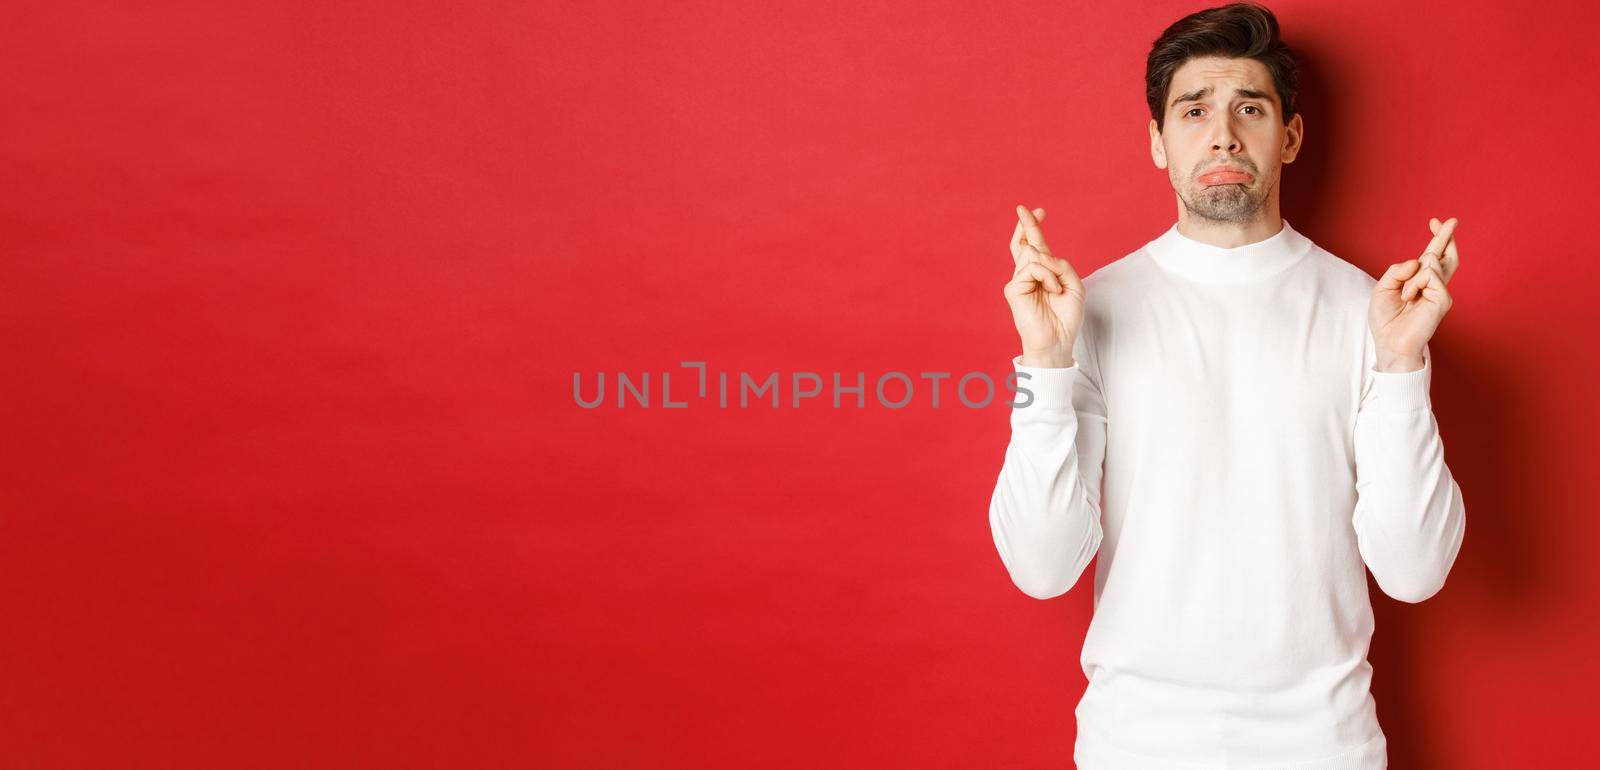 Image of sad and gloomy guy in white sweater, crying with fingers crossed, waiting for something or praying, standing over red background.